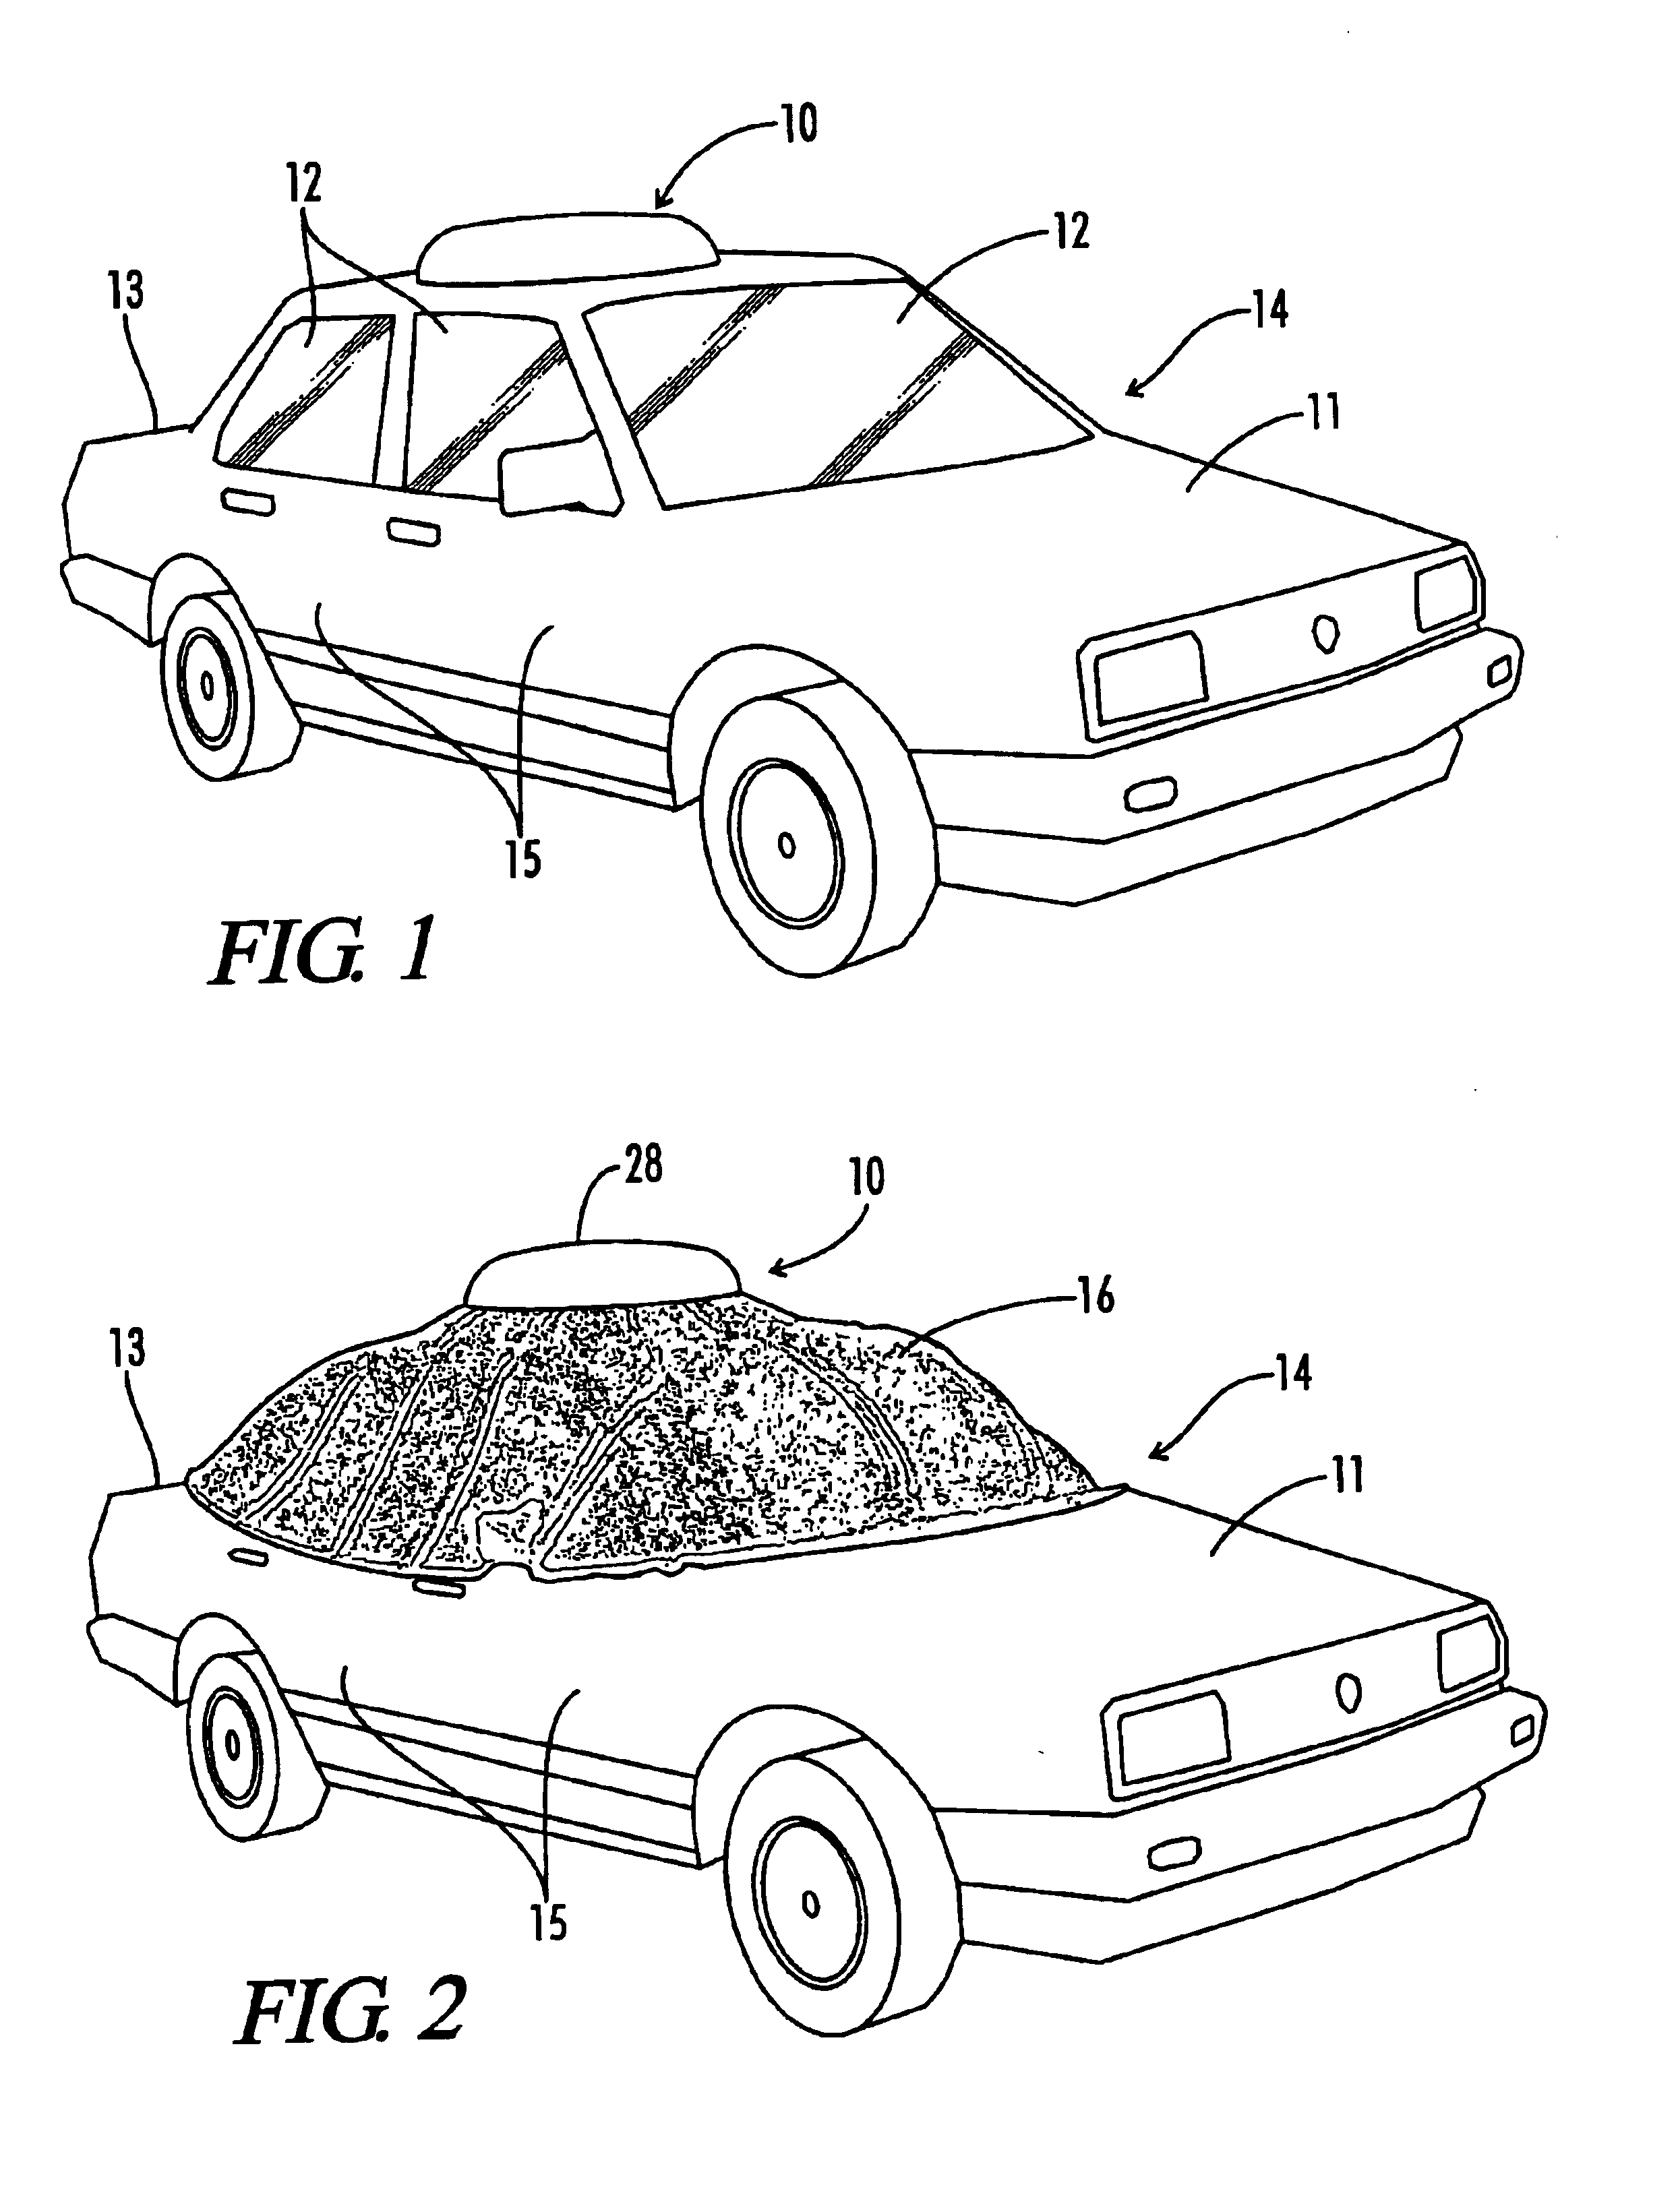 Automated covering for an automobile